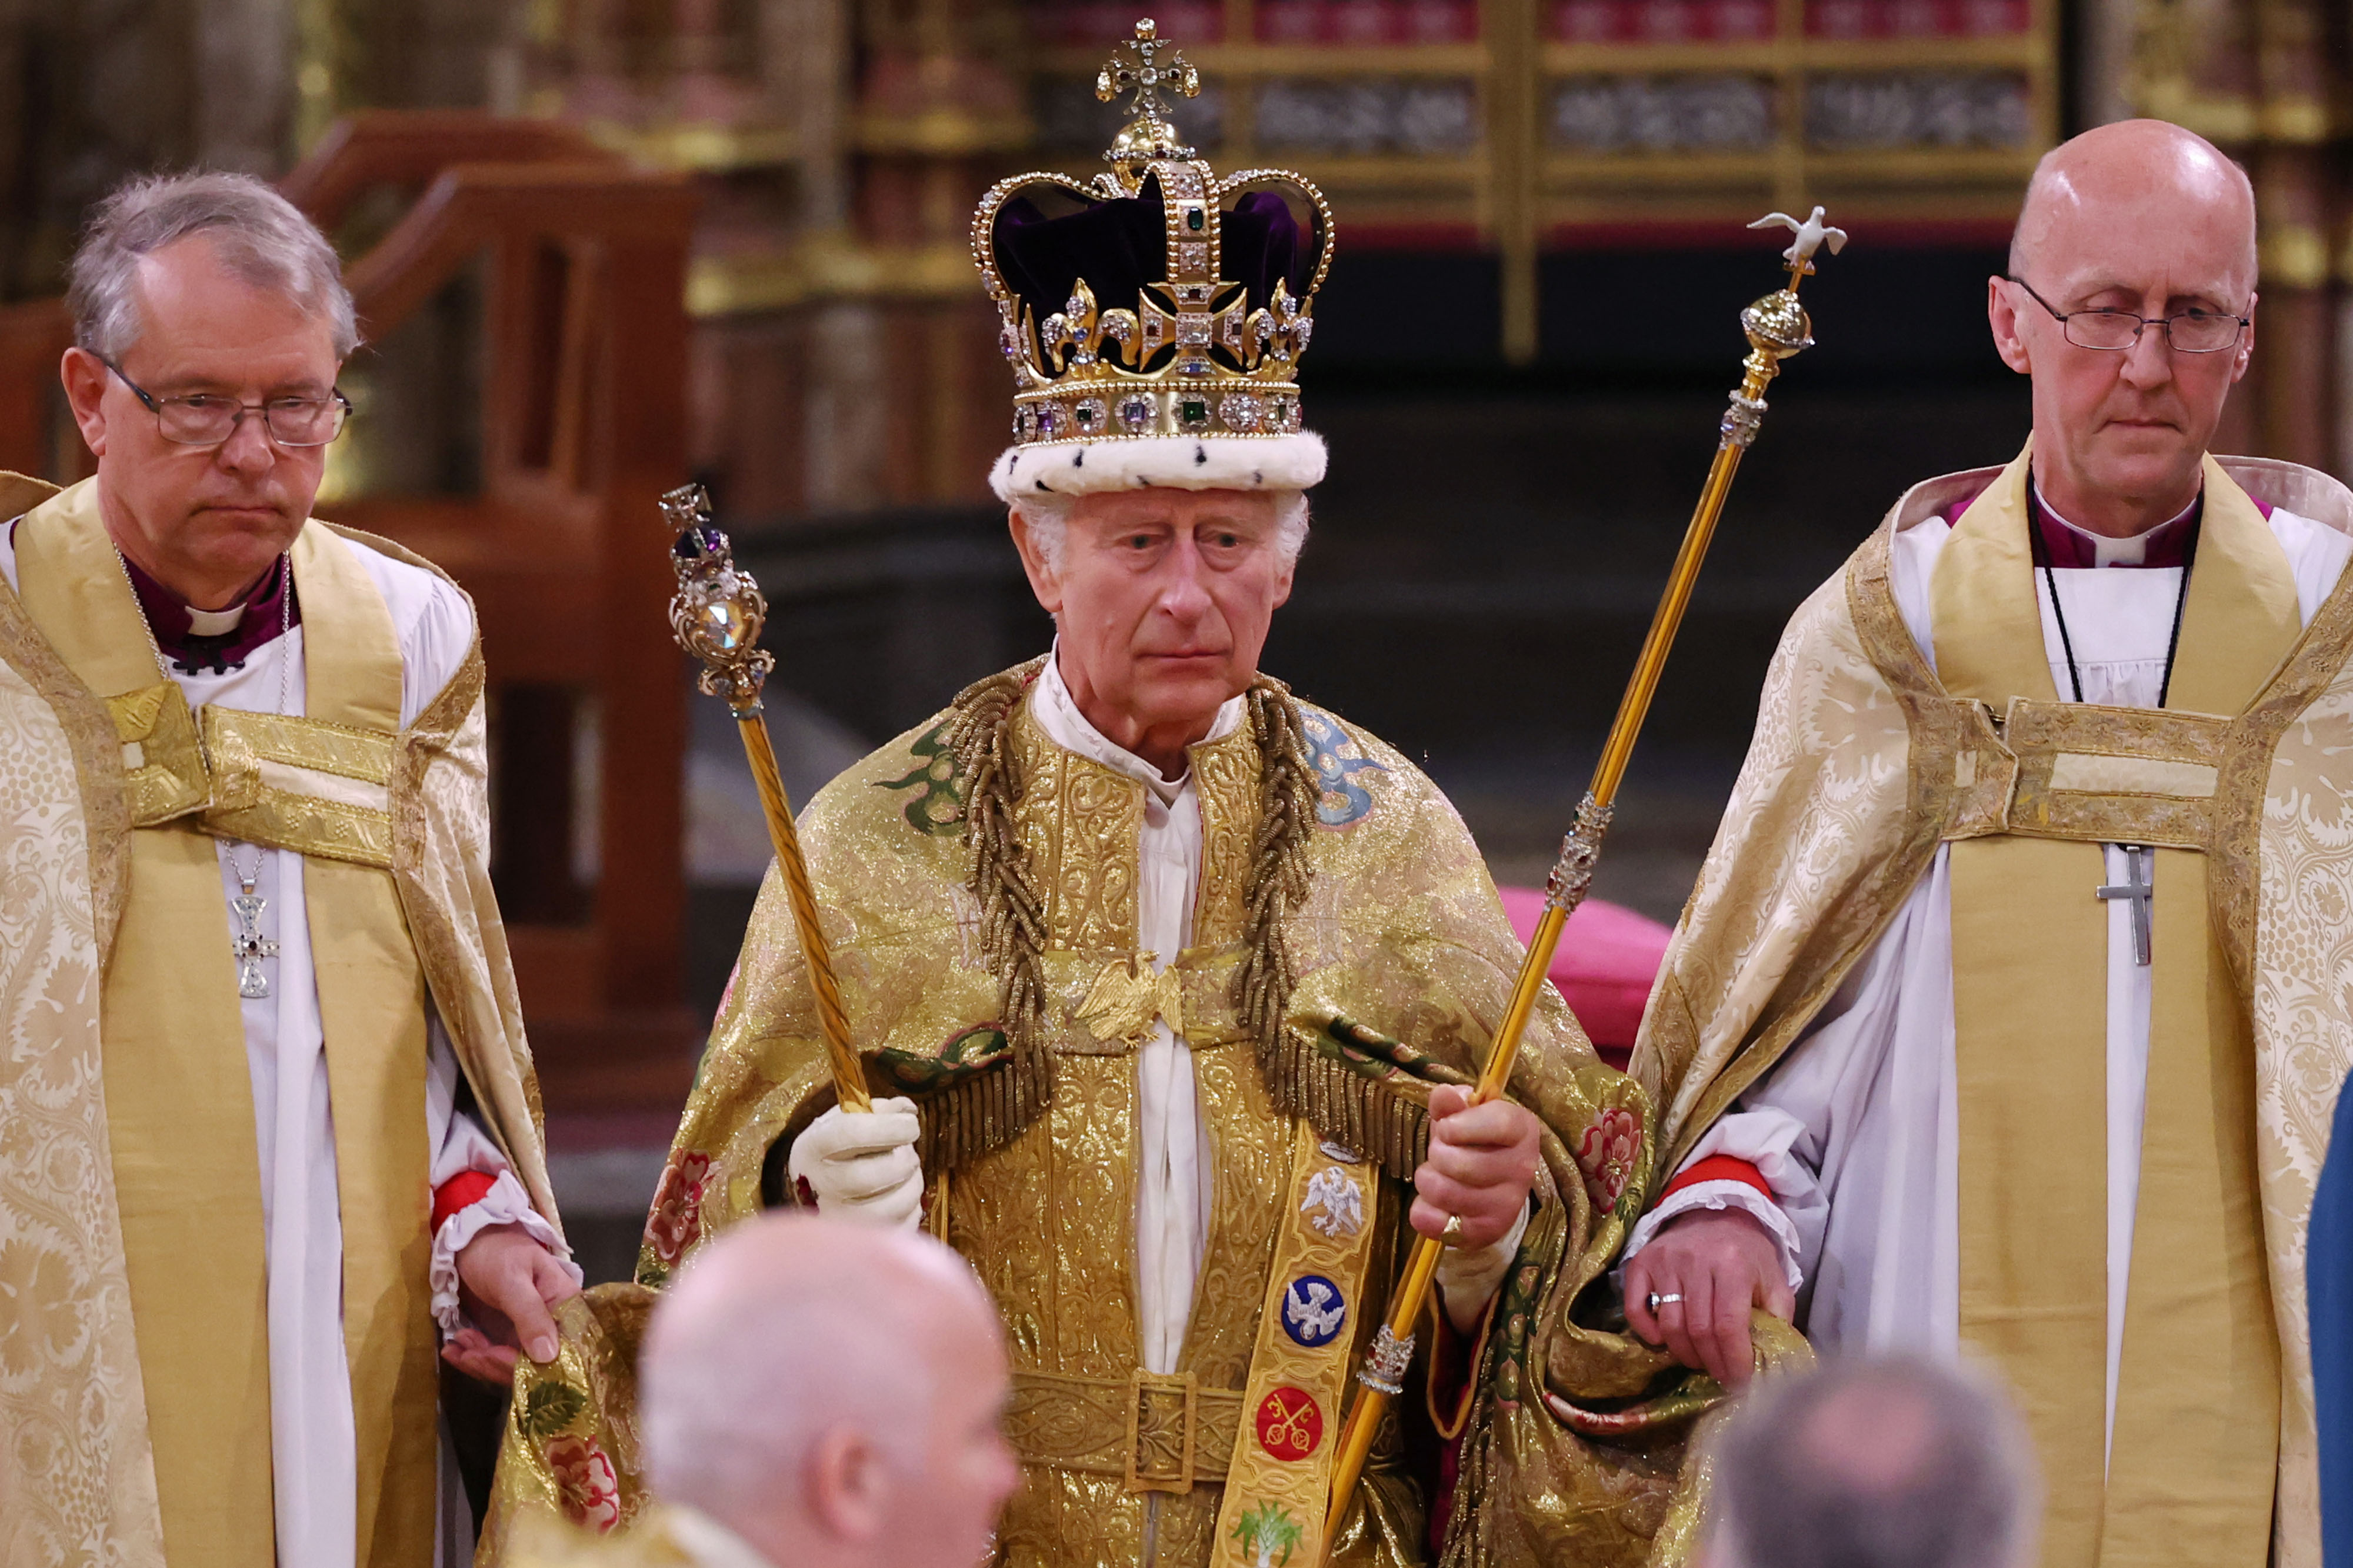 King Charles III after being crowned during his coronation ceremony in Westminster Abbey, on May 6, 2023 in London, England | Source: Getty Images